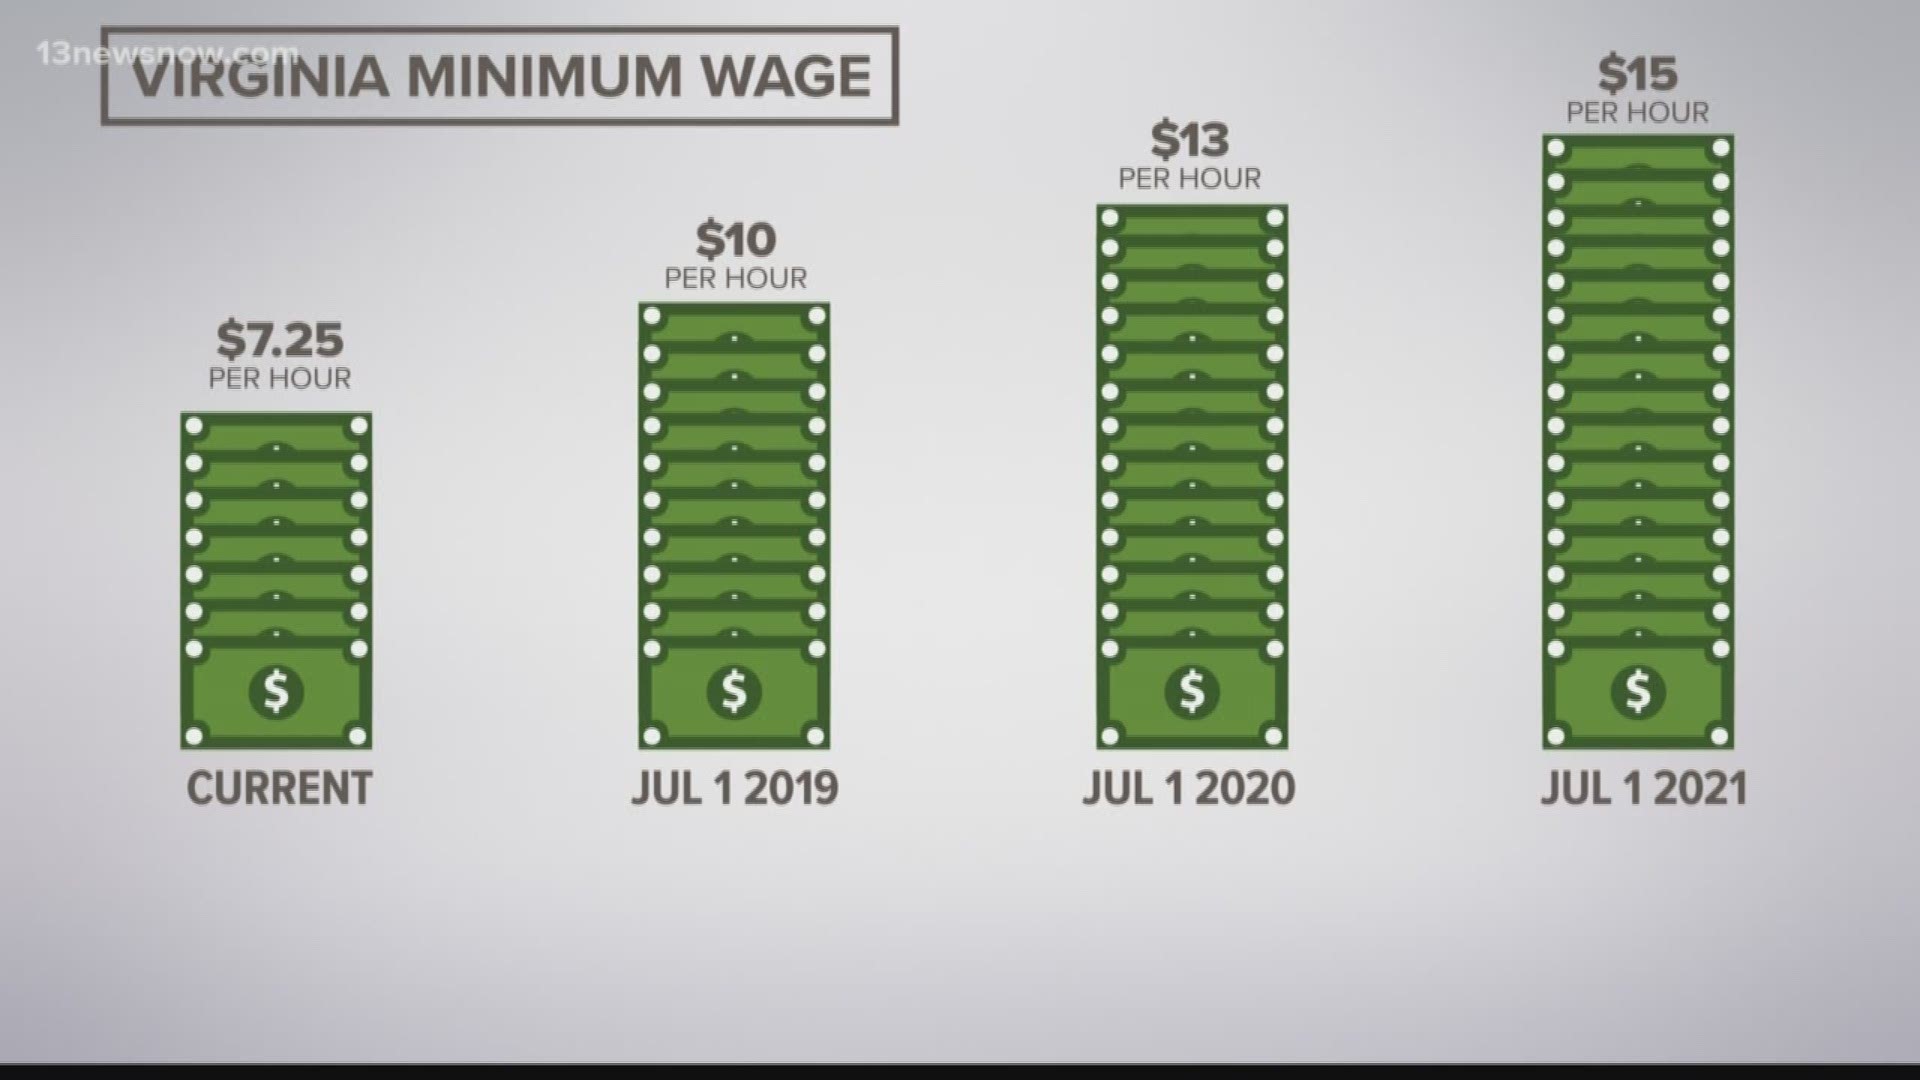 A new bill in Virginia is proposing to raise the minimum wage to $15 over the next three years.